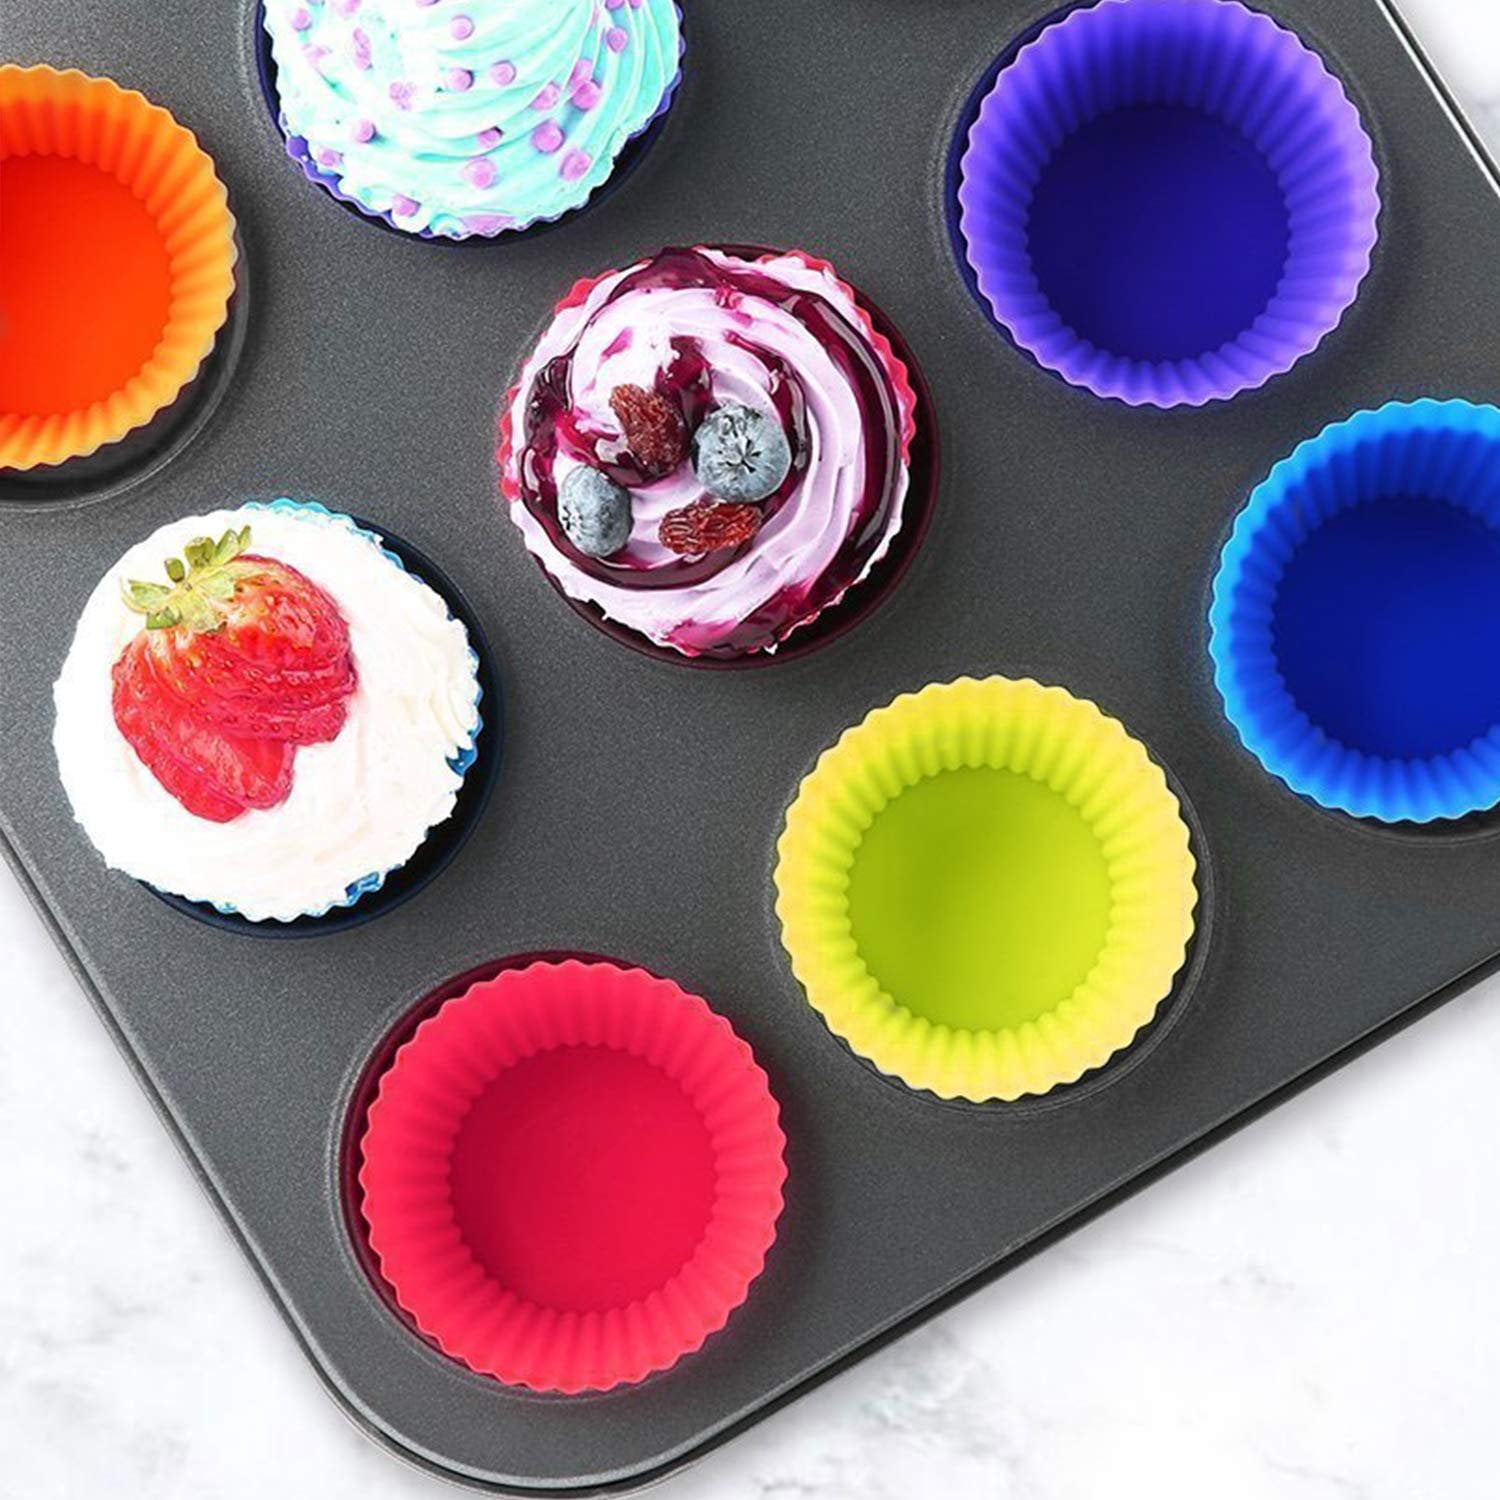 Freshware Silicone Cupcake Liners / Baking Cups - 12-Pack Muffin Molds,  Flower, Red and Black Colors